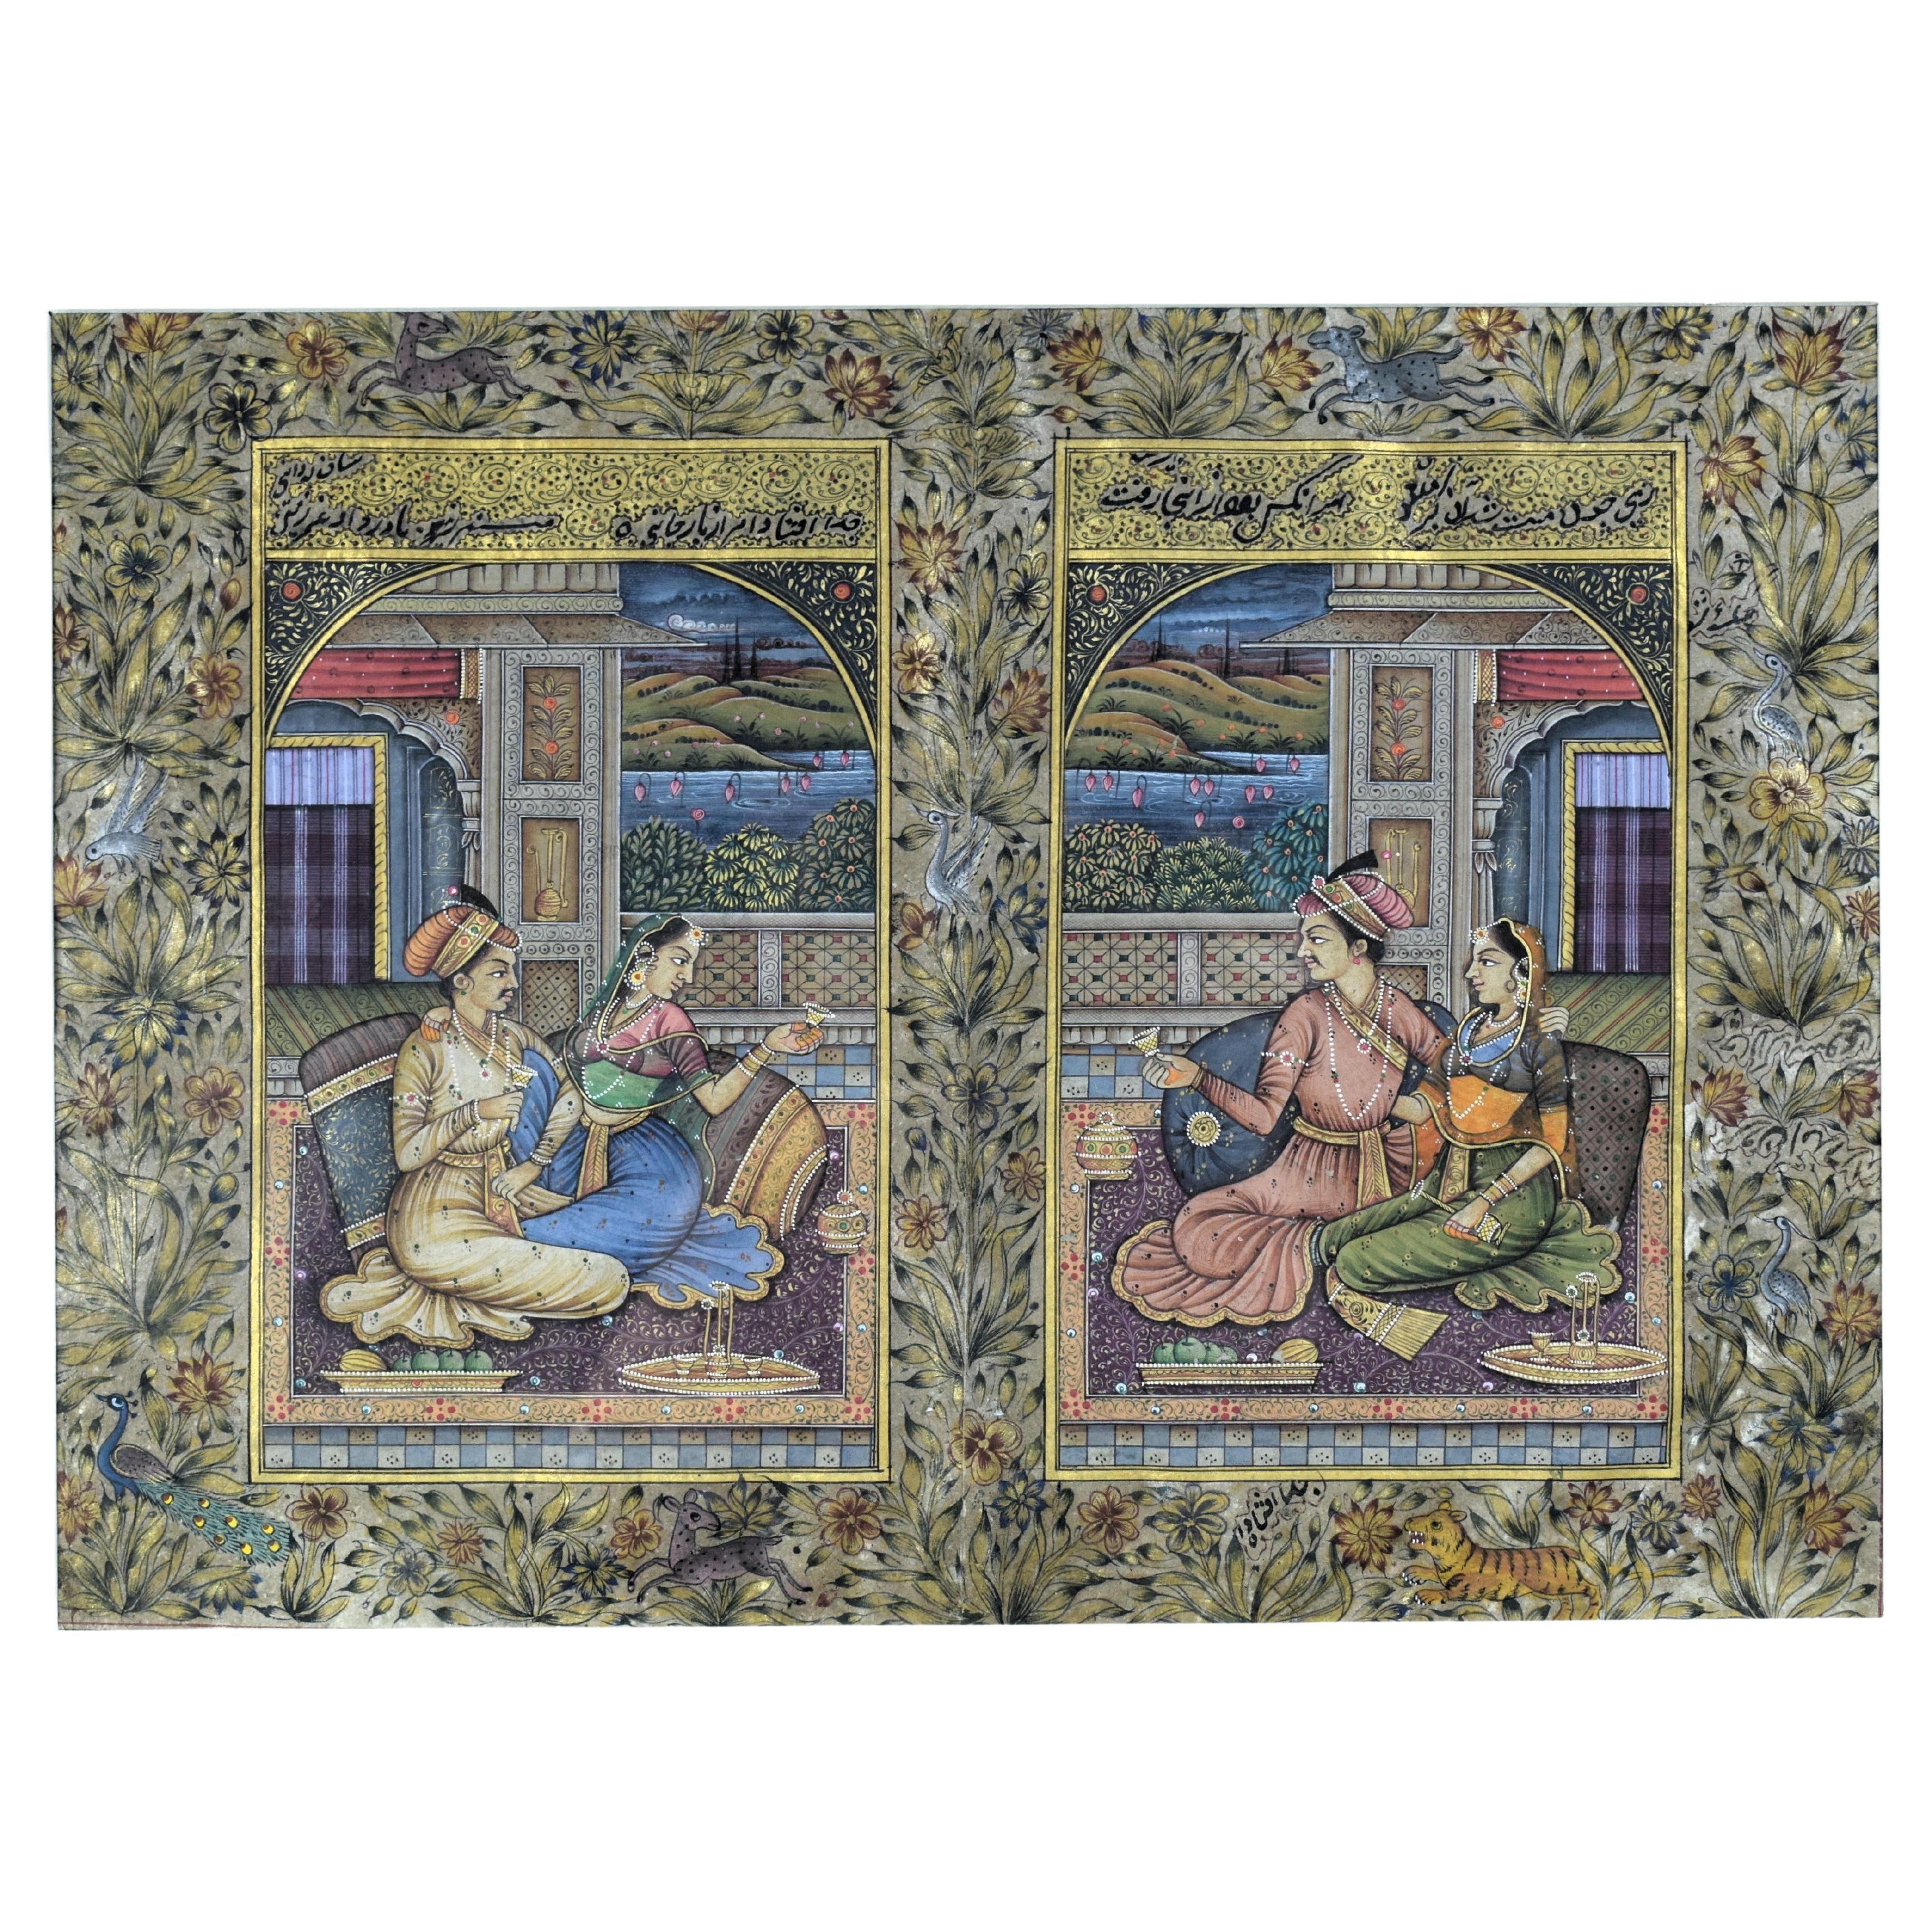 Miniature Mughal of Emperor Akbar And His Wife  In His Courtyard, 19th Century